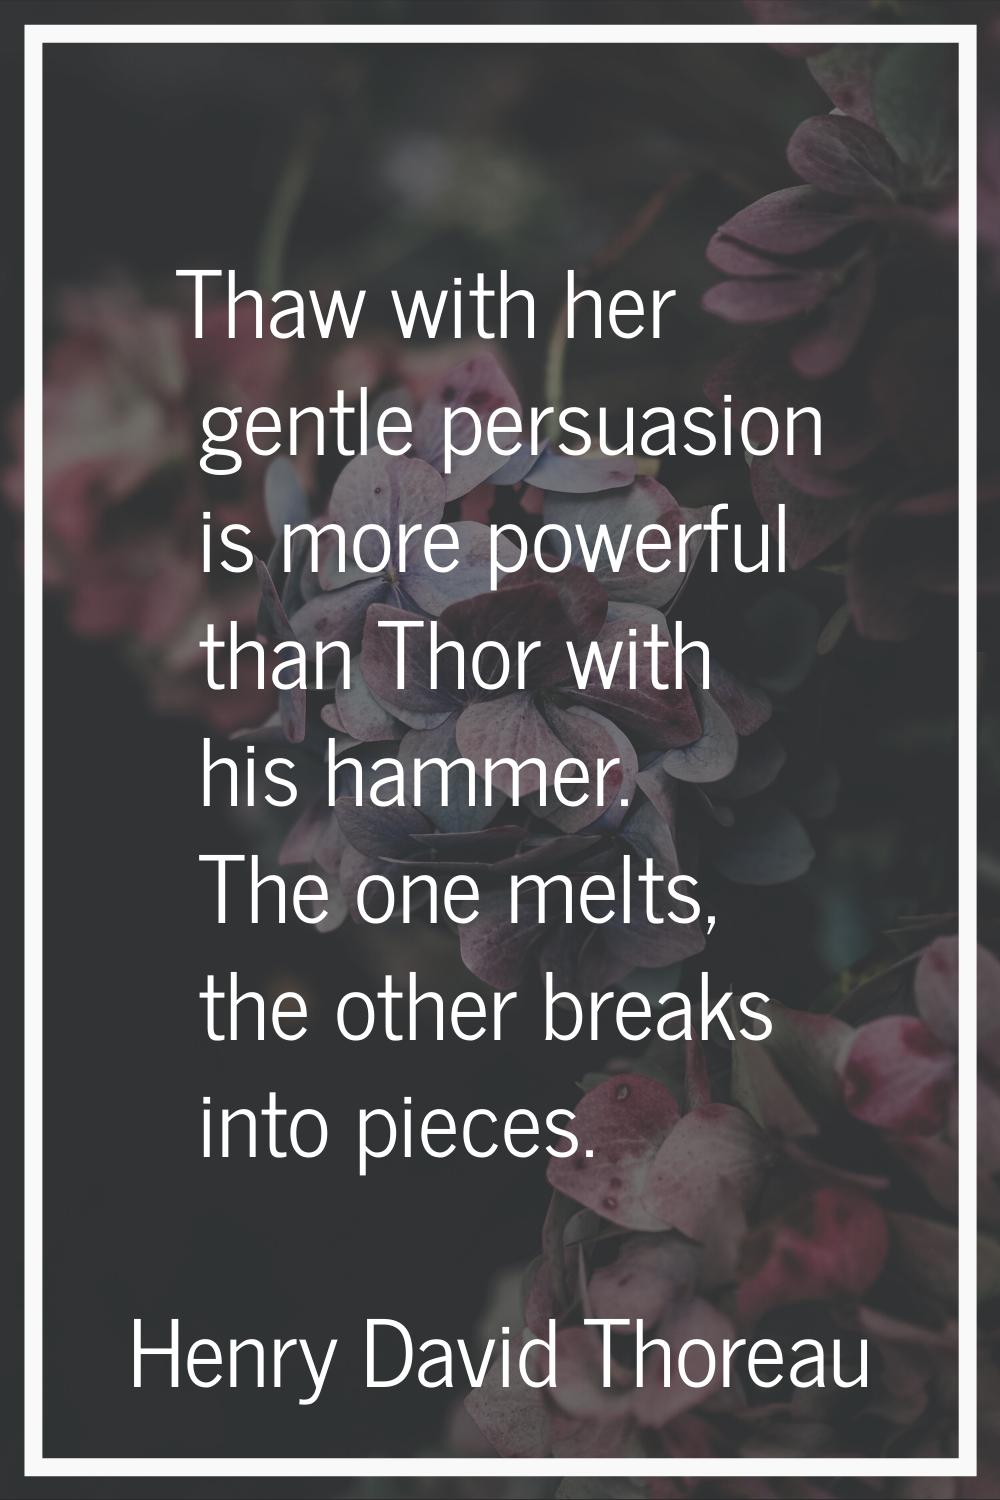 Thaw with her gentle persuasion is more powerful than Thor with his hammer. The one melts, the othe